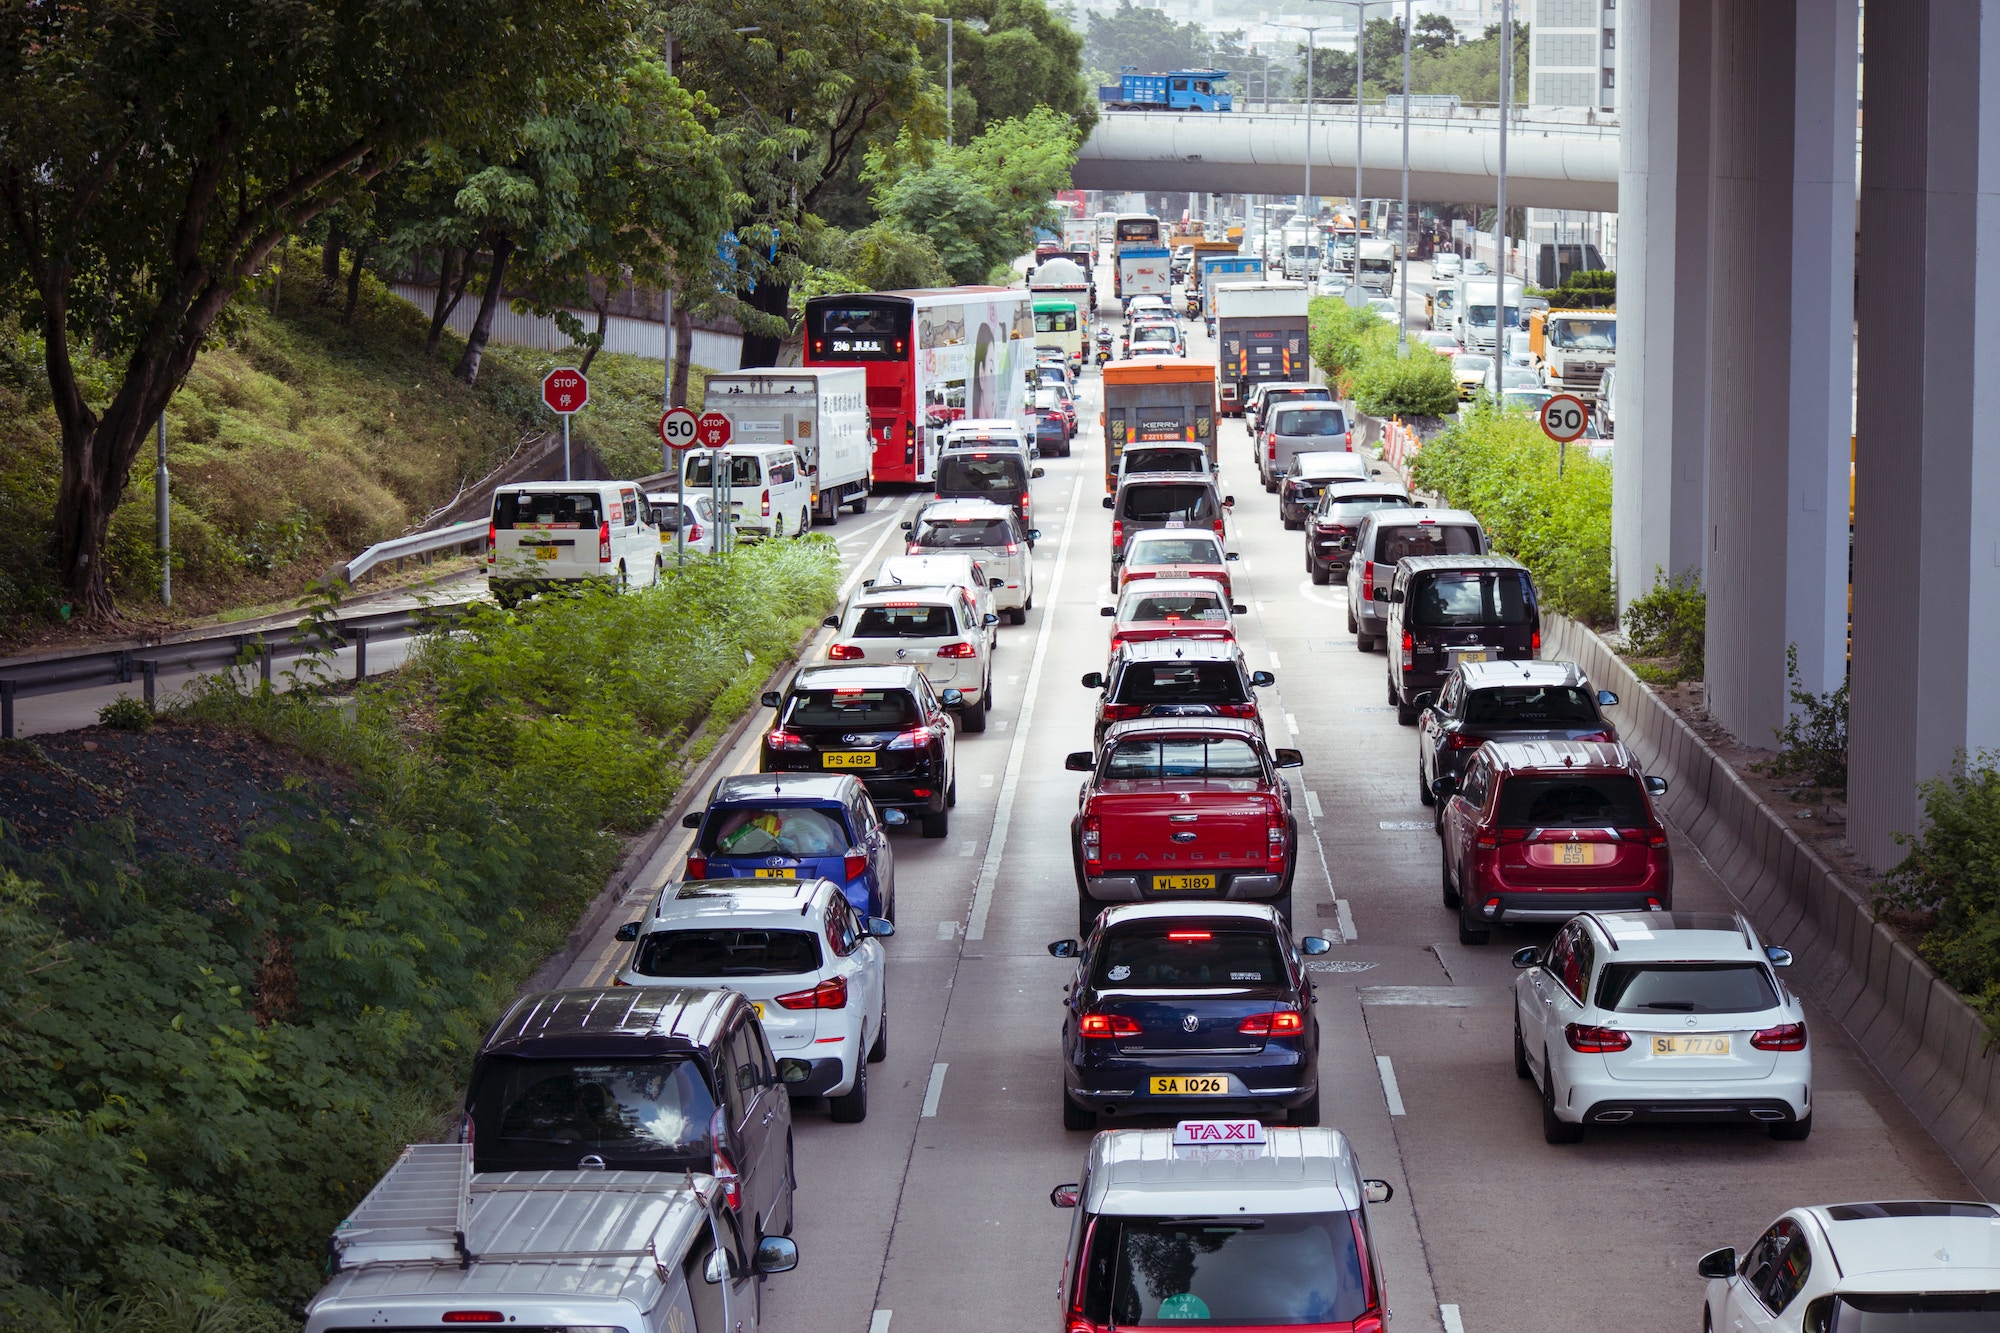 Should Macao-registered cars be allowed to drive into urban Hong Kong?